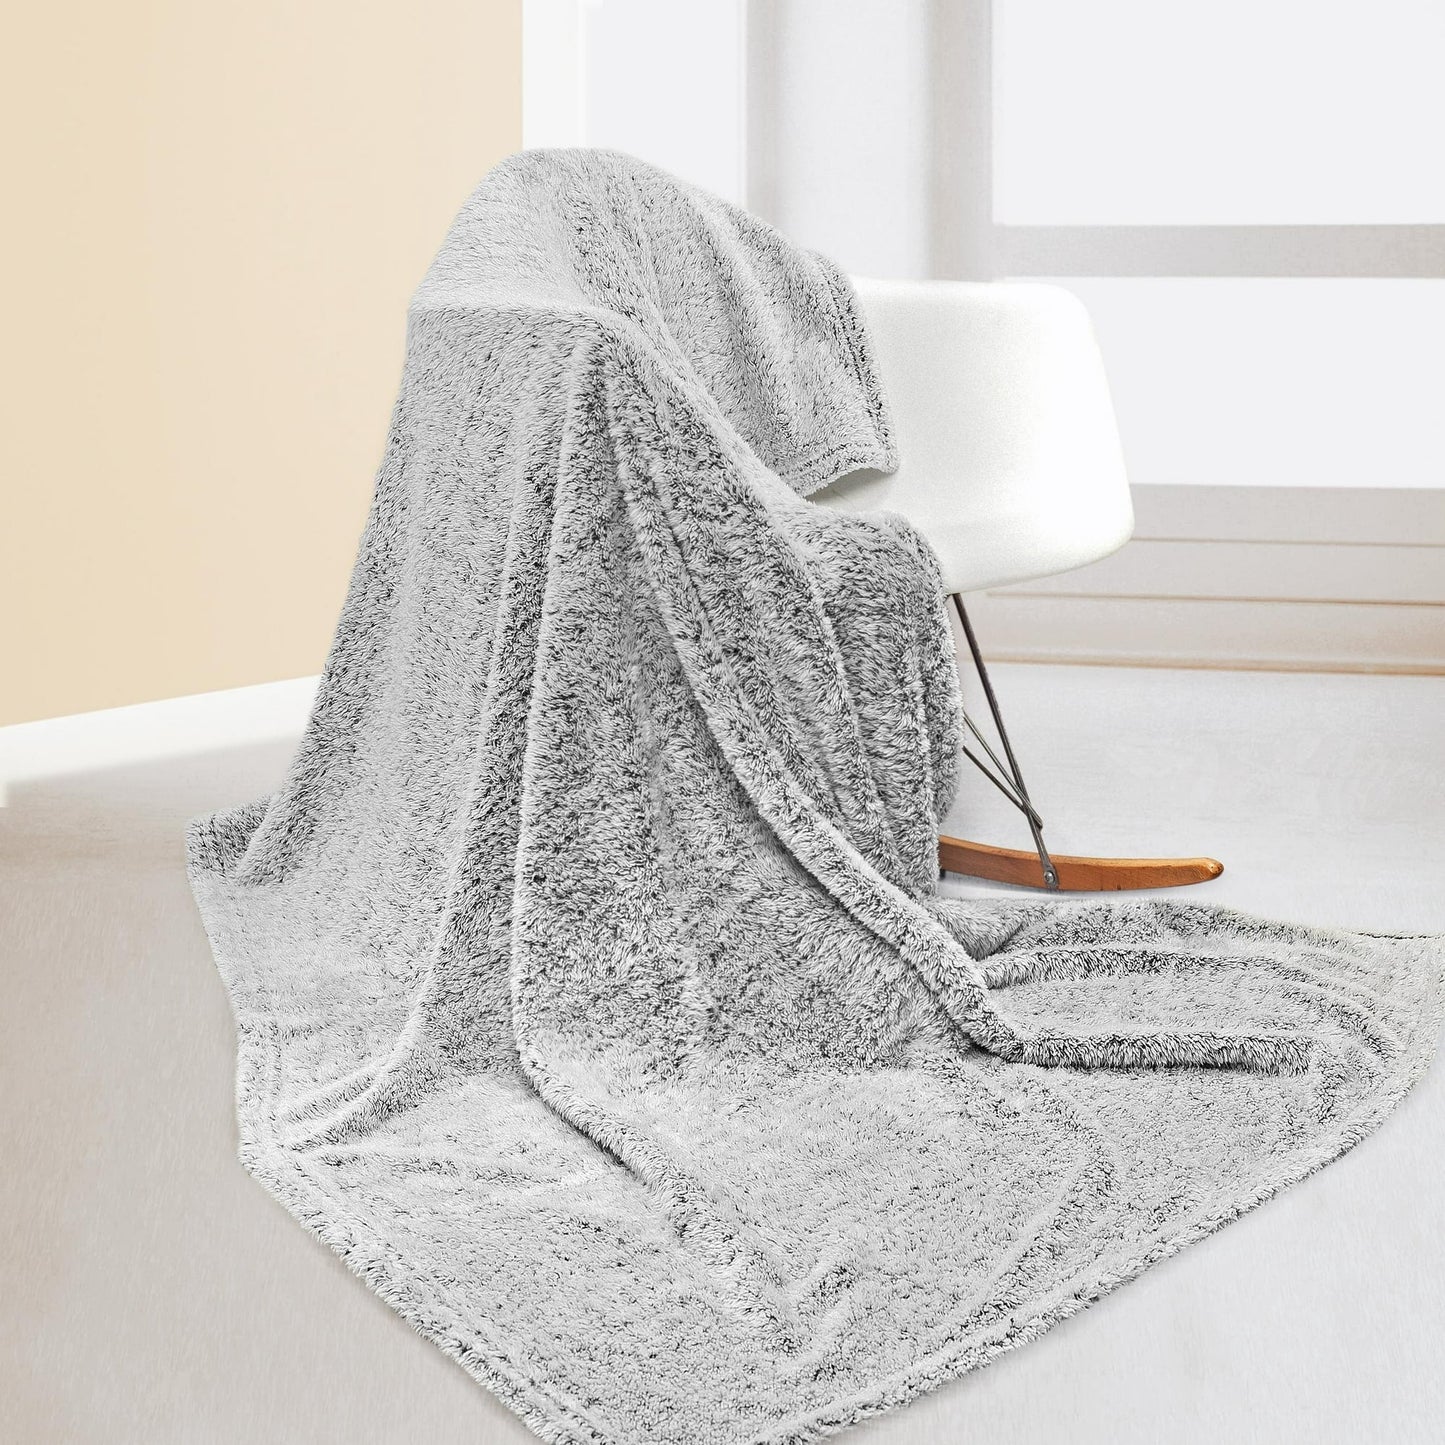 Throw blanket for cozy nights